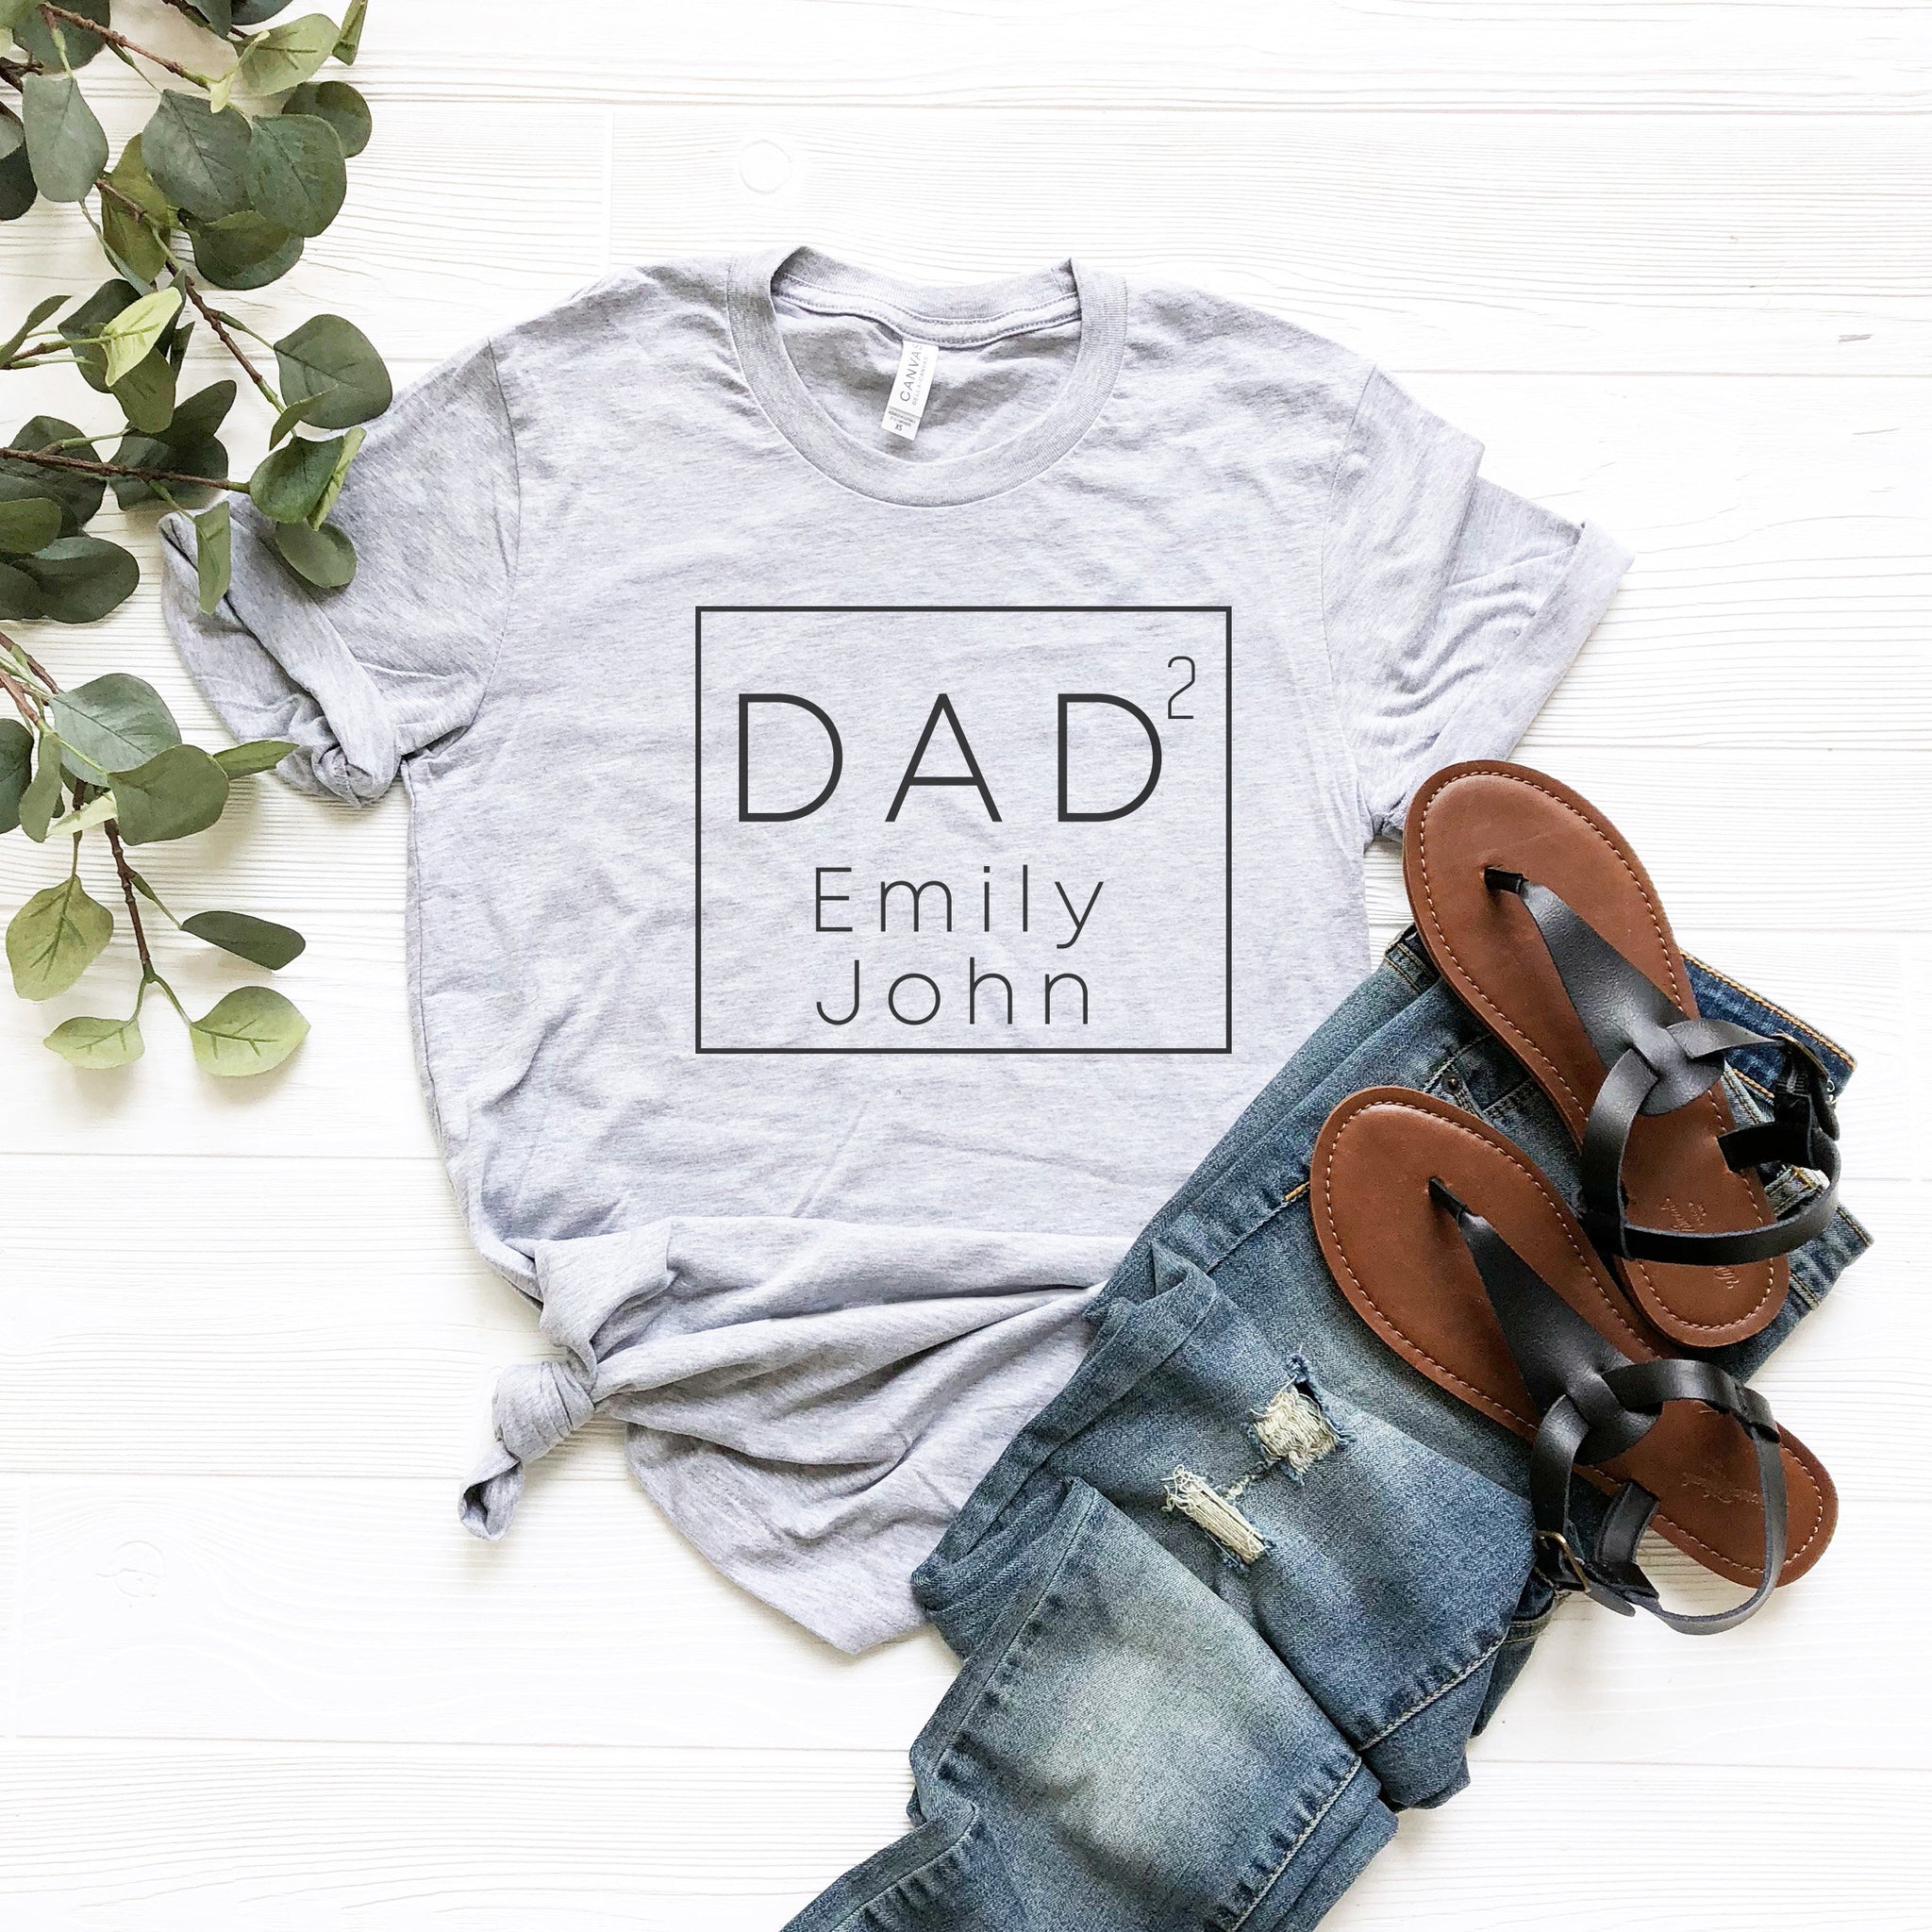 Personalized Dad Shirt for Fathers Day, Personalized Dad gift, Custom Dad Shirt, Funny Shirts for dad, dad square, daughter,Dad Birthday,d98 - Fastdeliverytees.com